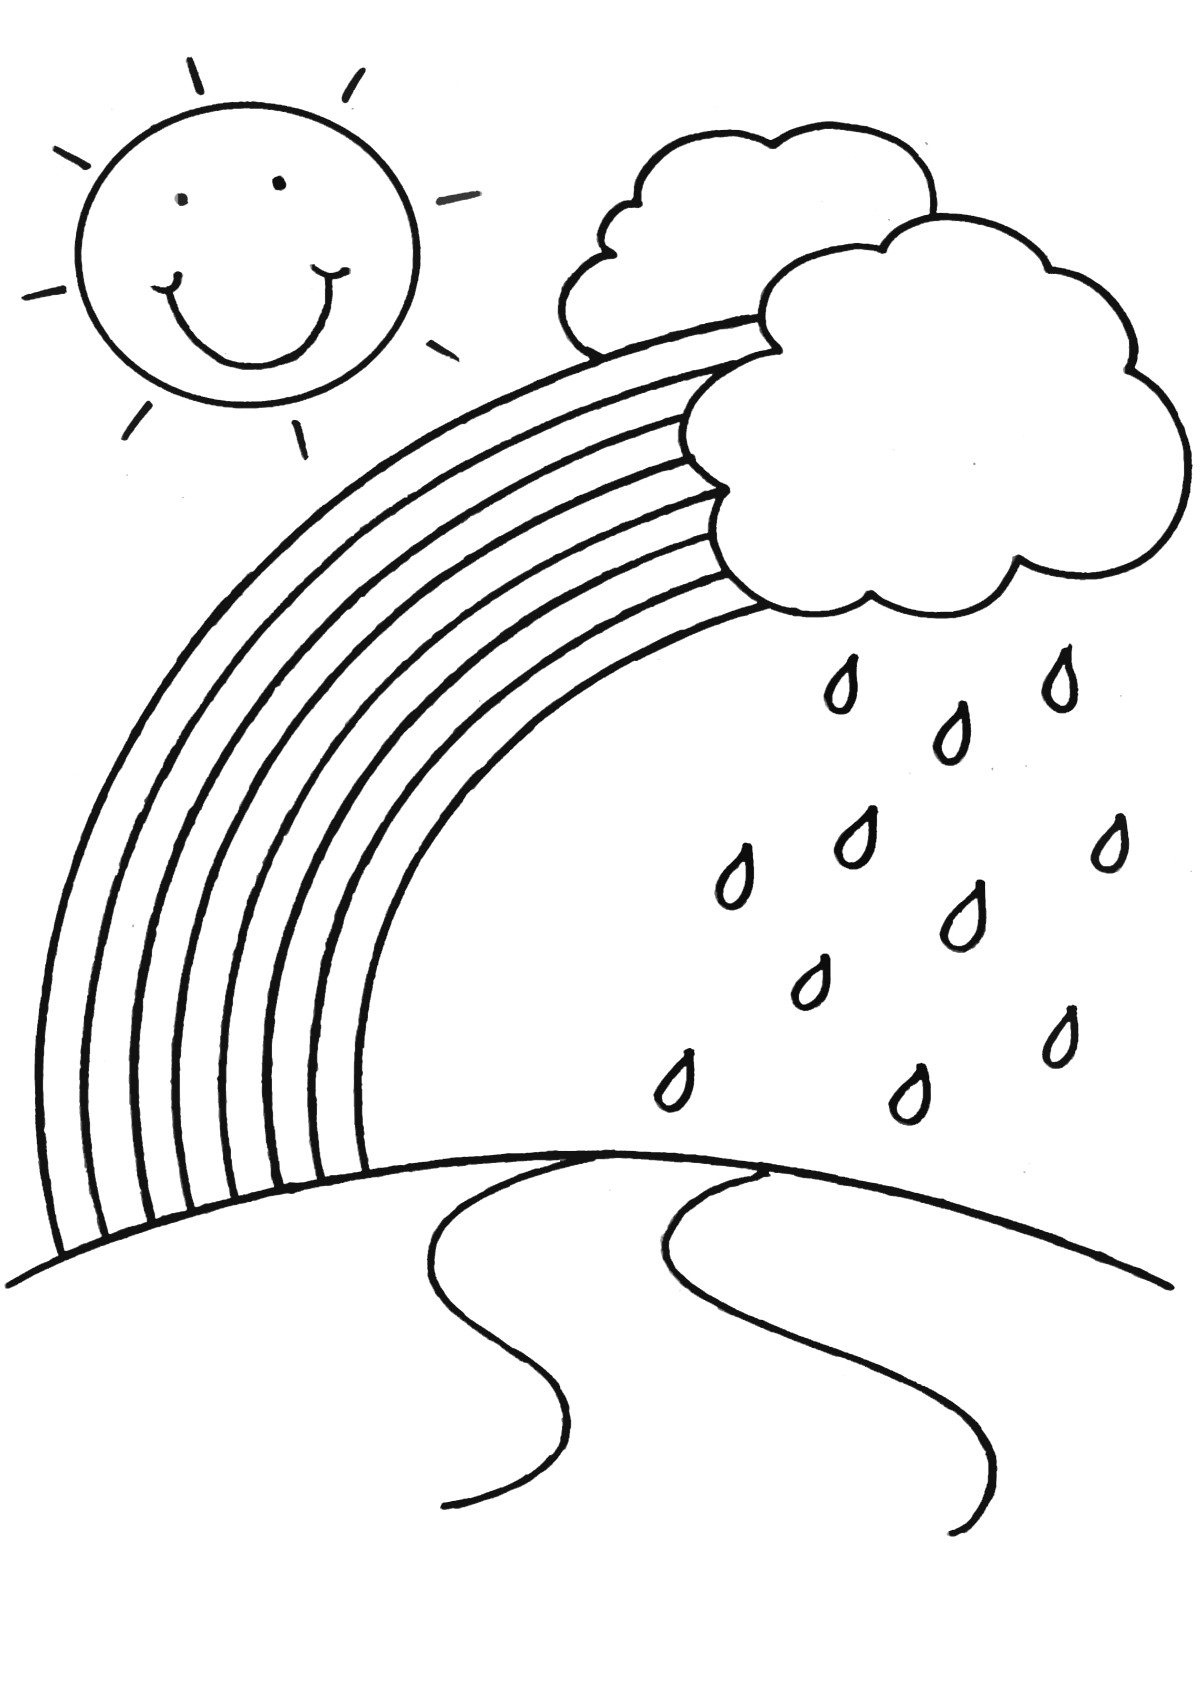 Rainbow Coloring Pages For Toddlers
 Rainbow Coloring Pages for childrens printable for free